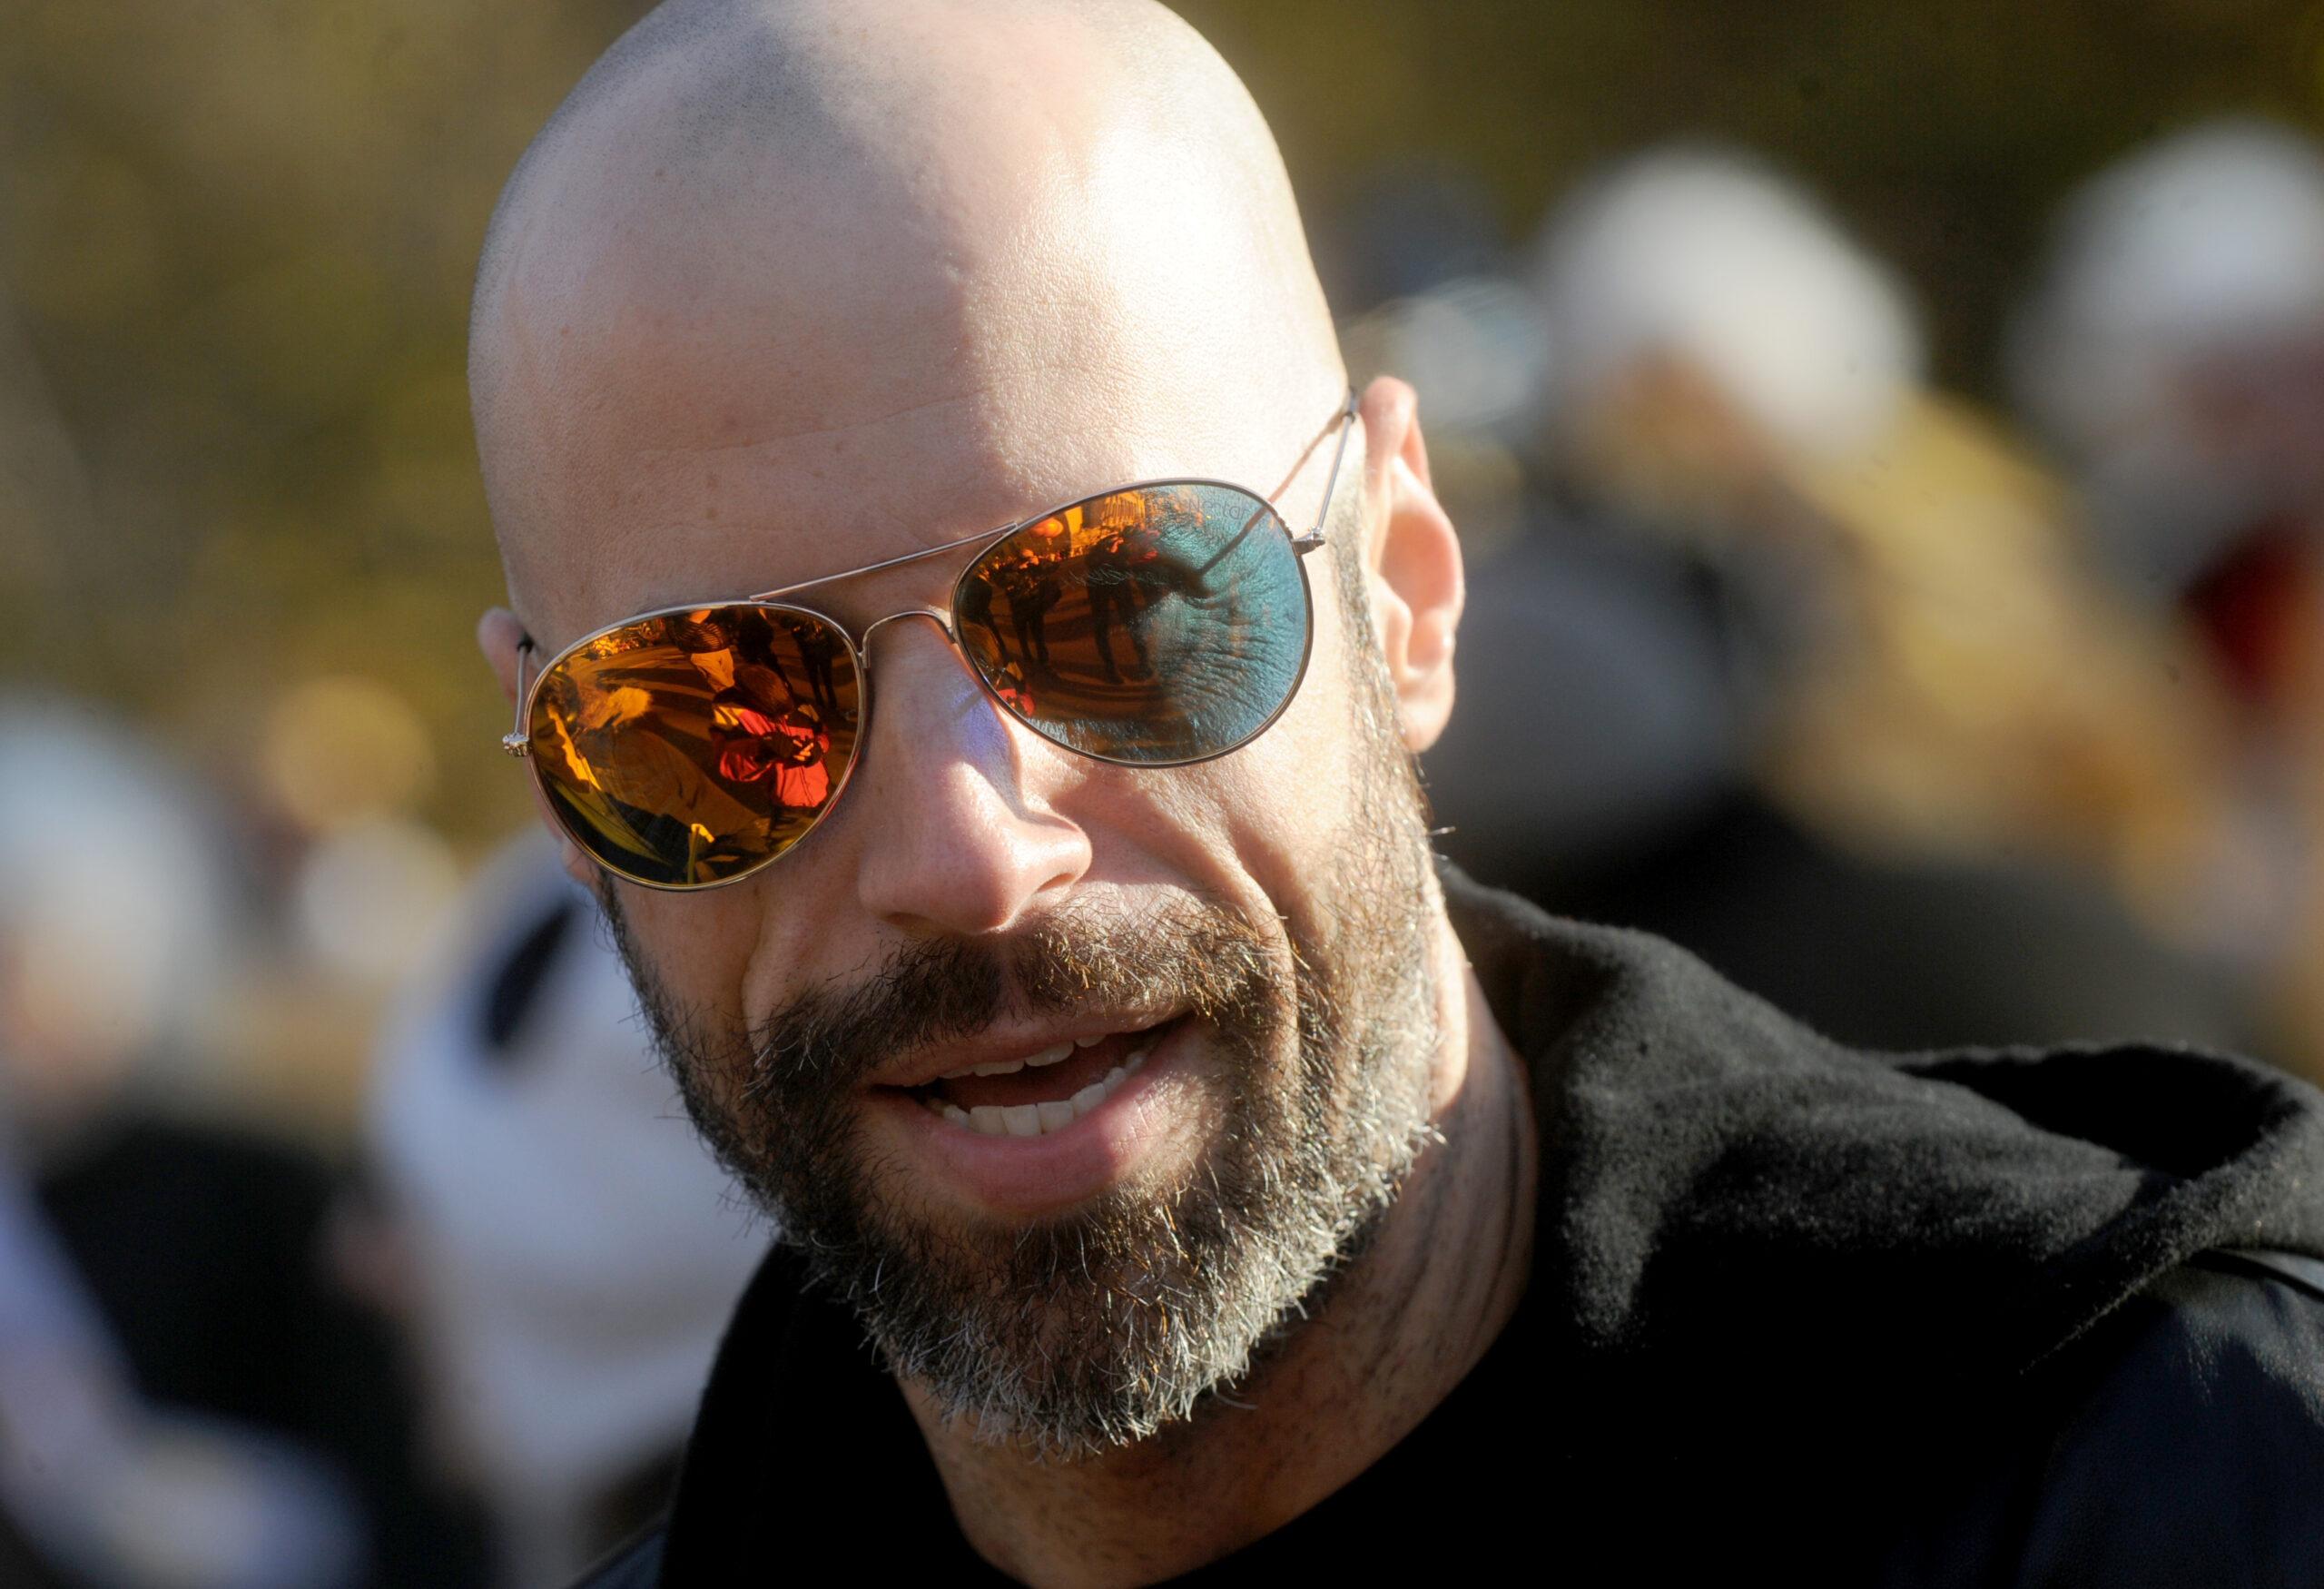 Chris Daughtry participates in the 89th Annual Macys Thanksgiving Day Parade on November 26, 2015